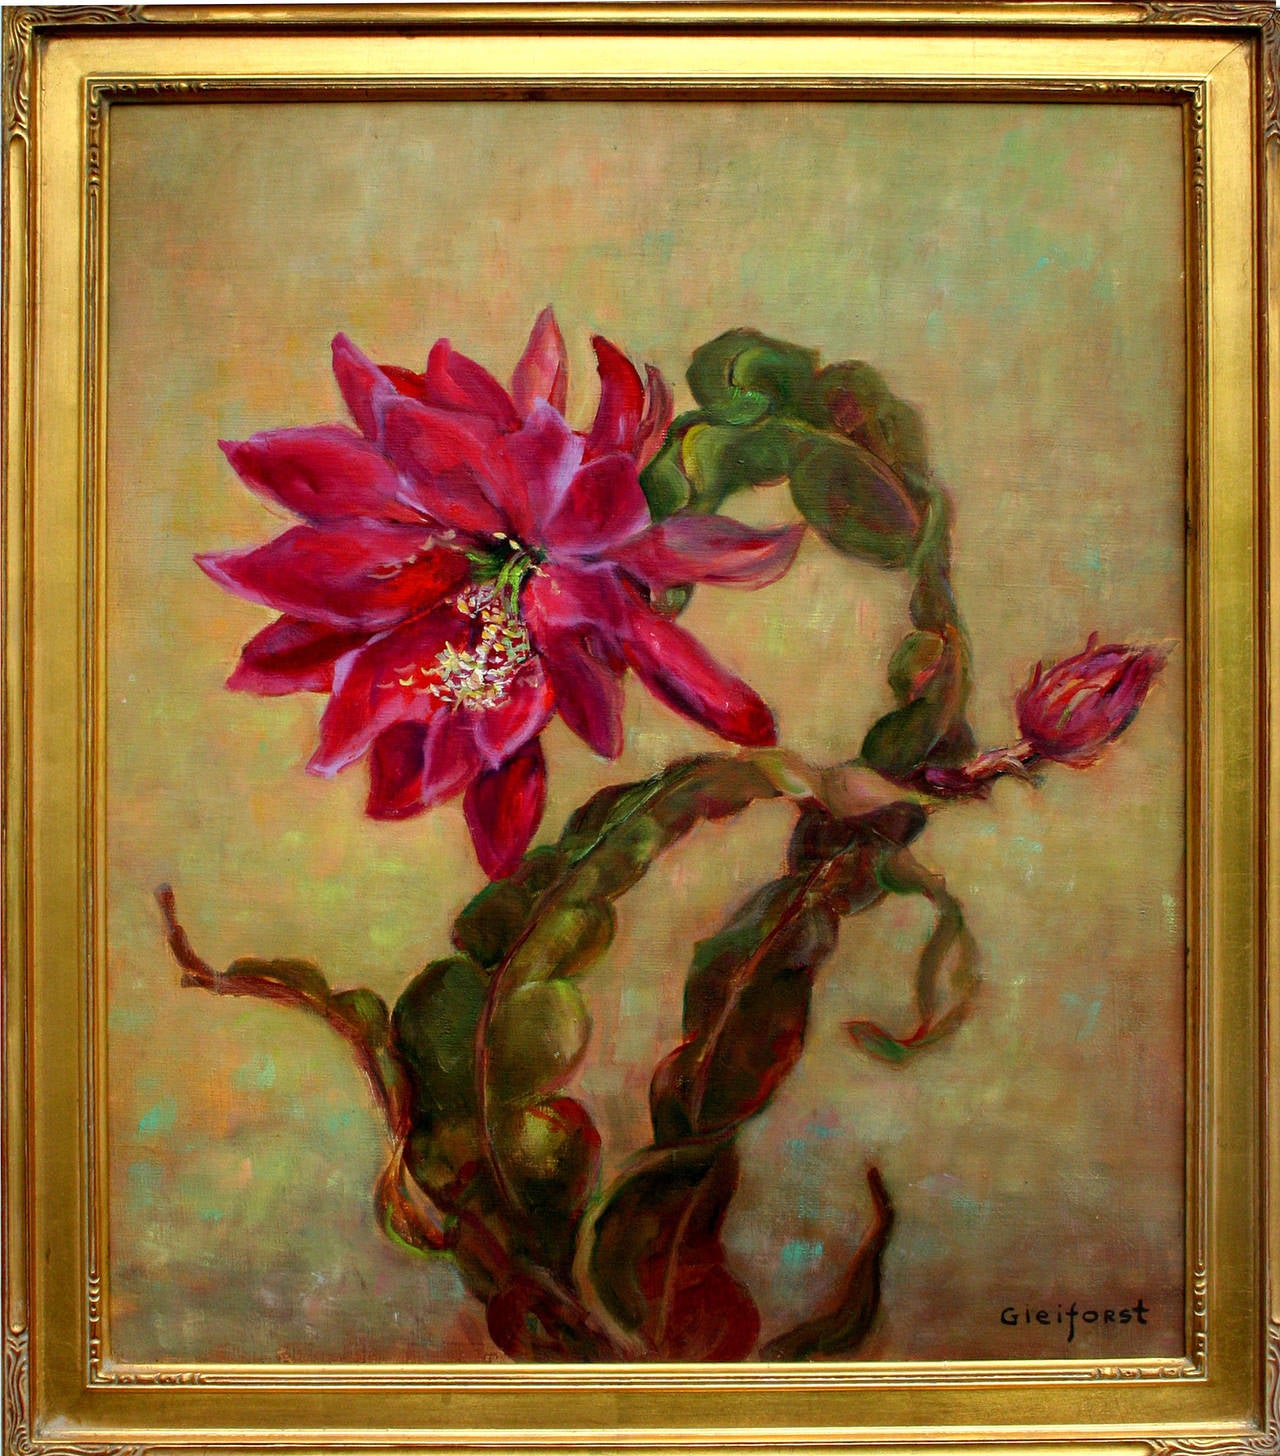 Helen Enoch Gleiforst Interior Painting - Christmas Cactus Soothing Cactus colors